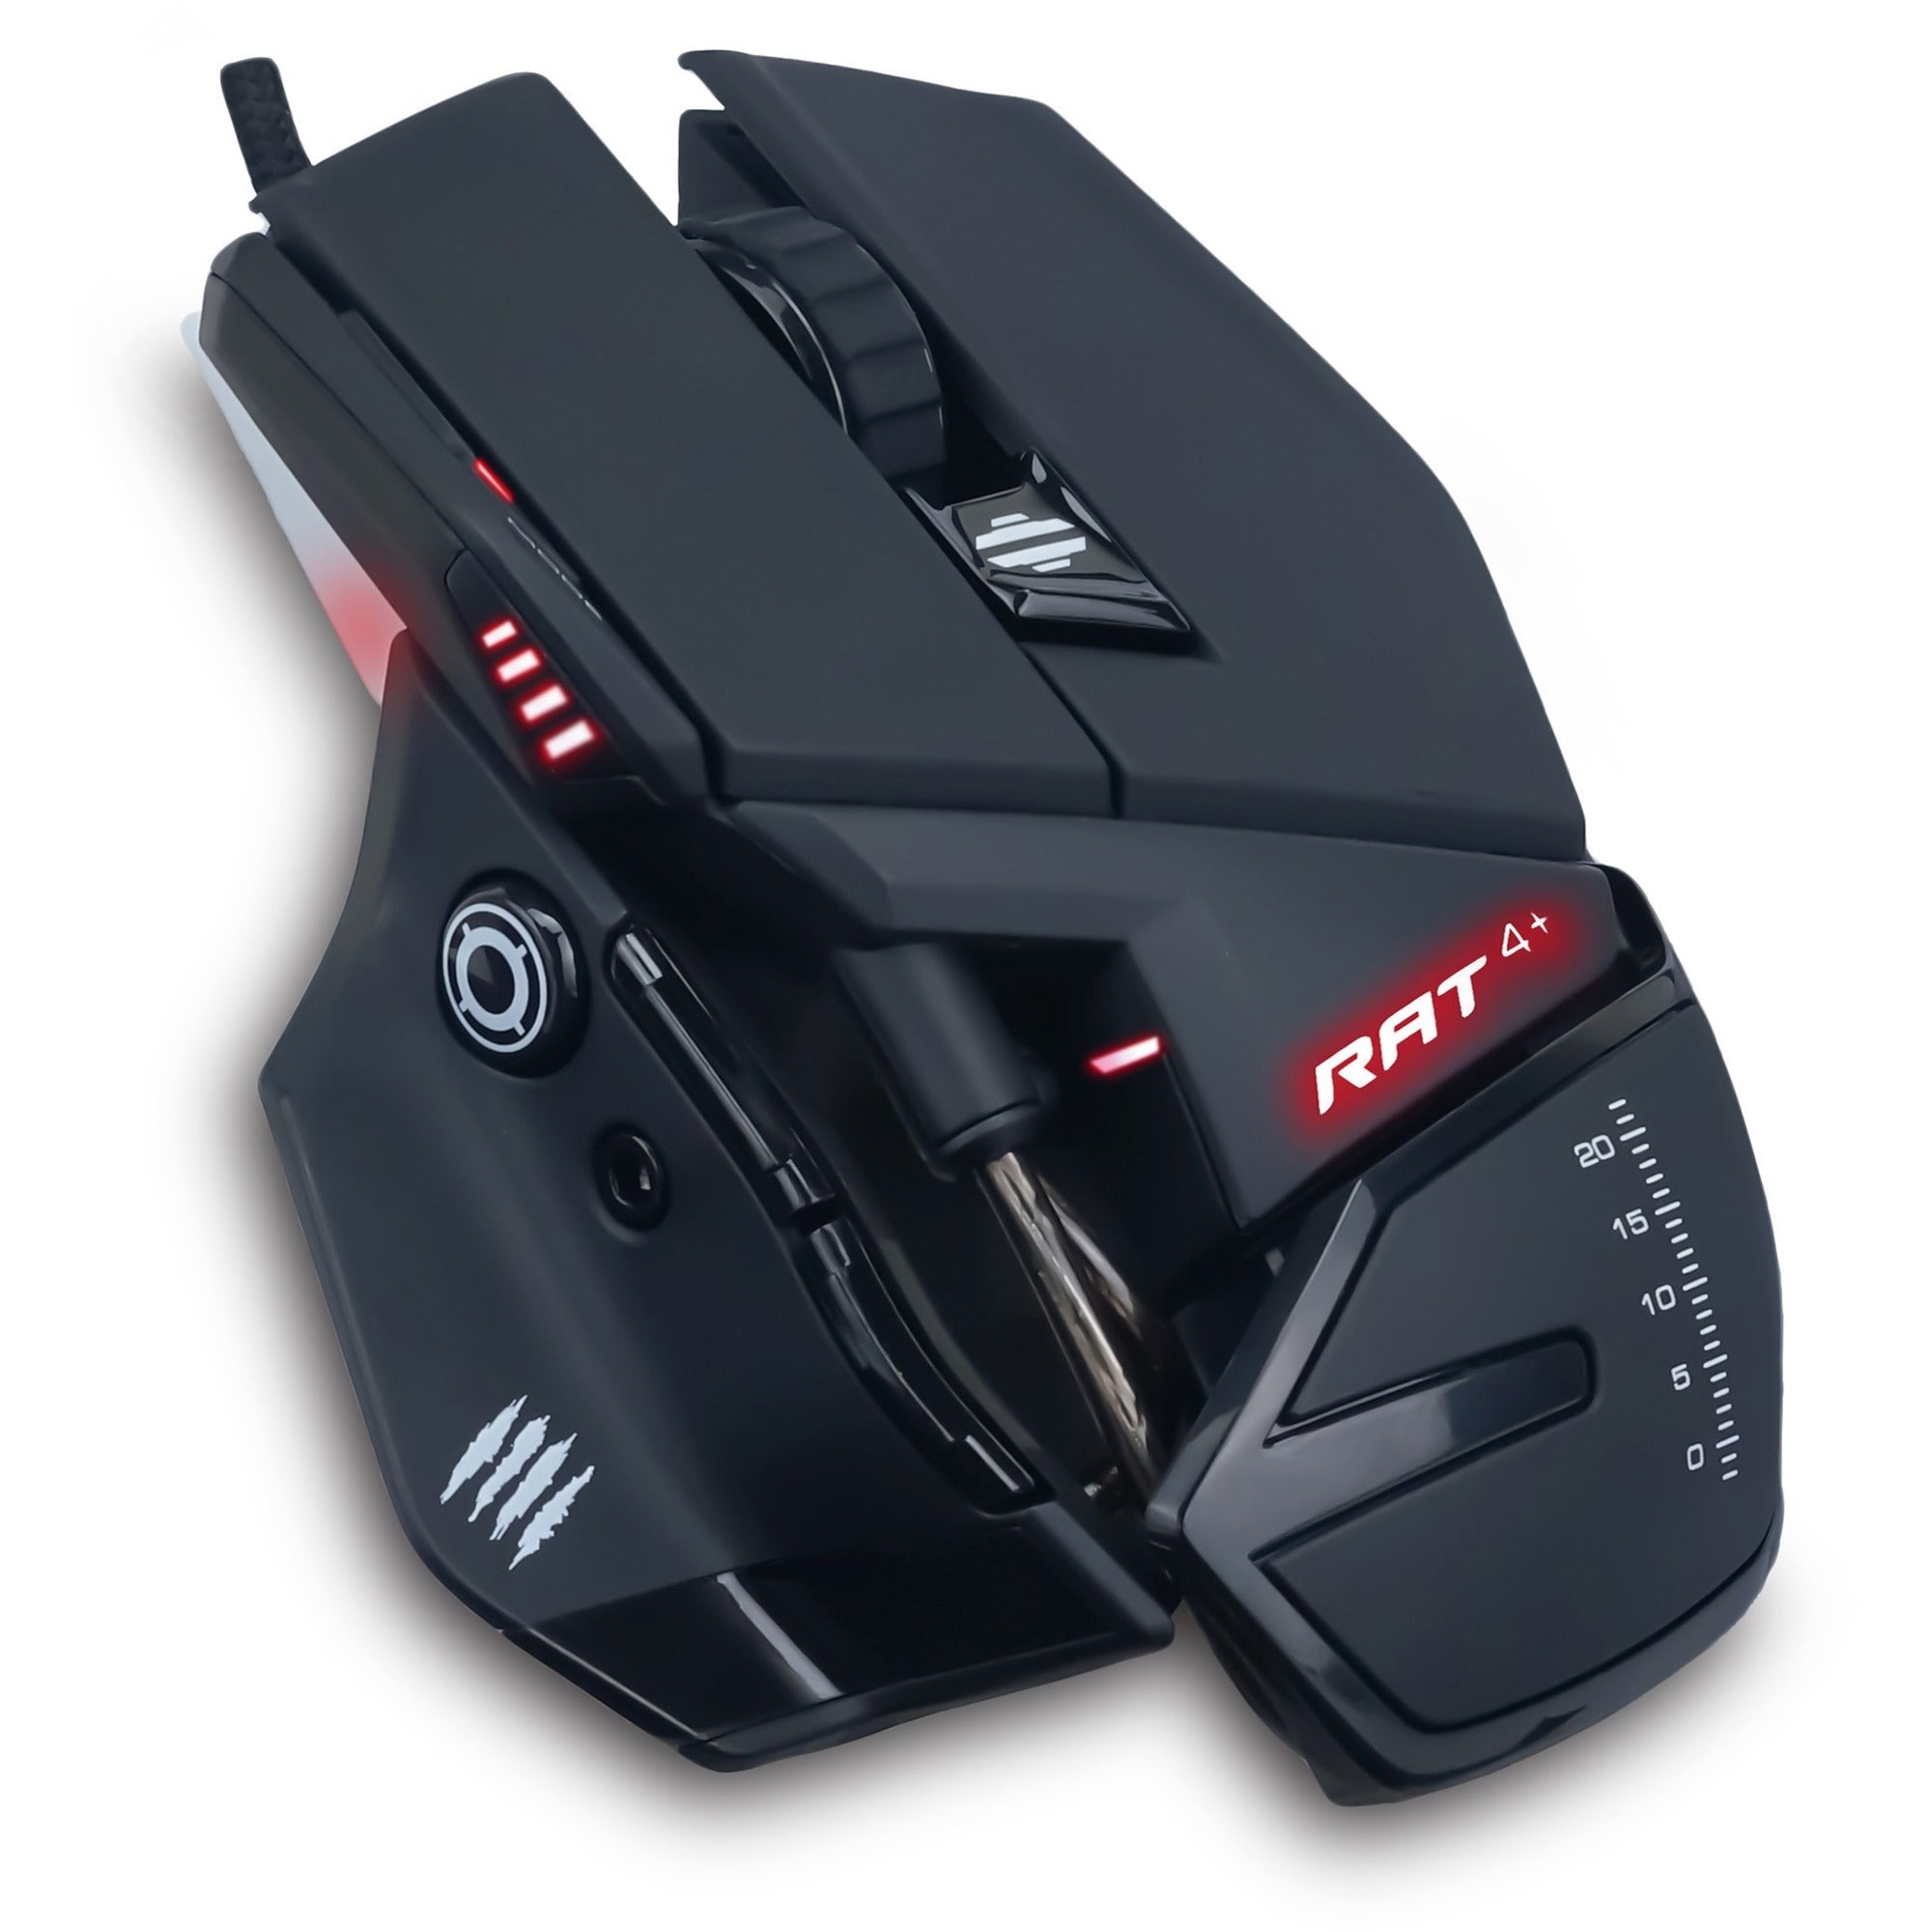 mad-catz-the-authentic-rat-4+-optical-gaming-mouse-pixart-pmw3330-cable-black-1-pack-usb-20-7200-dpi-9-buttons_mdcmr03mcambl00 - 1